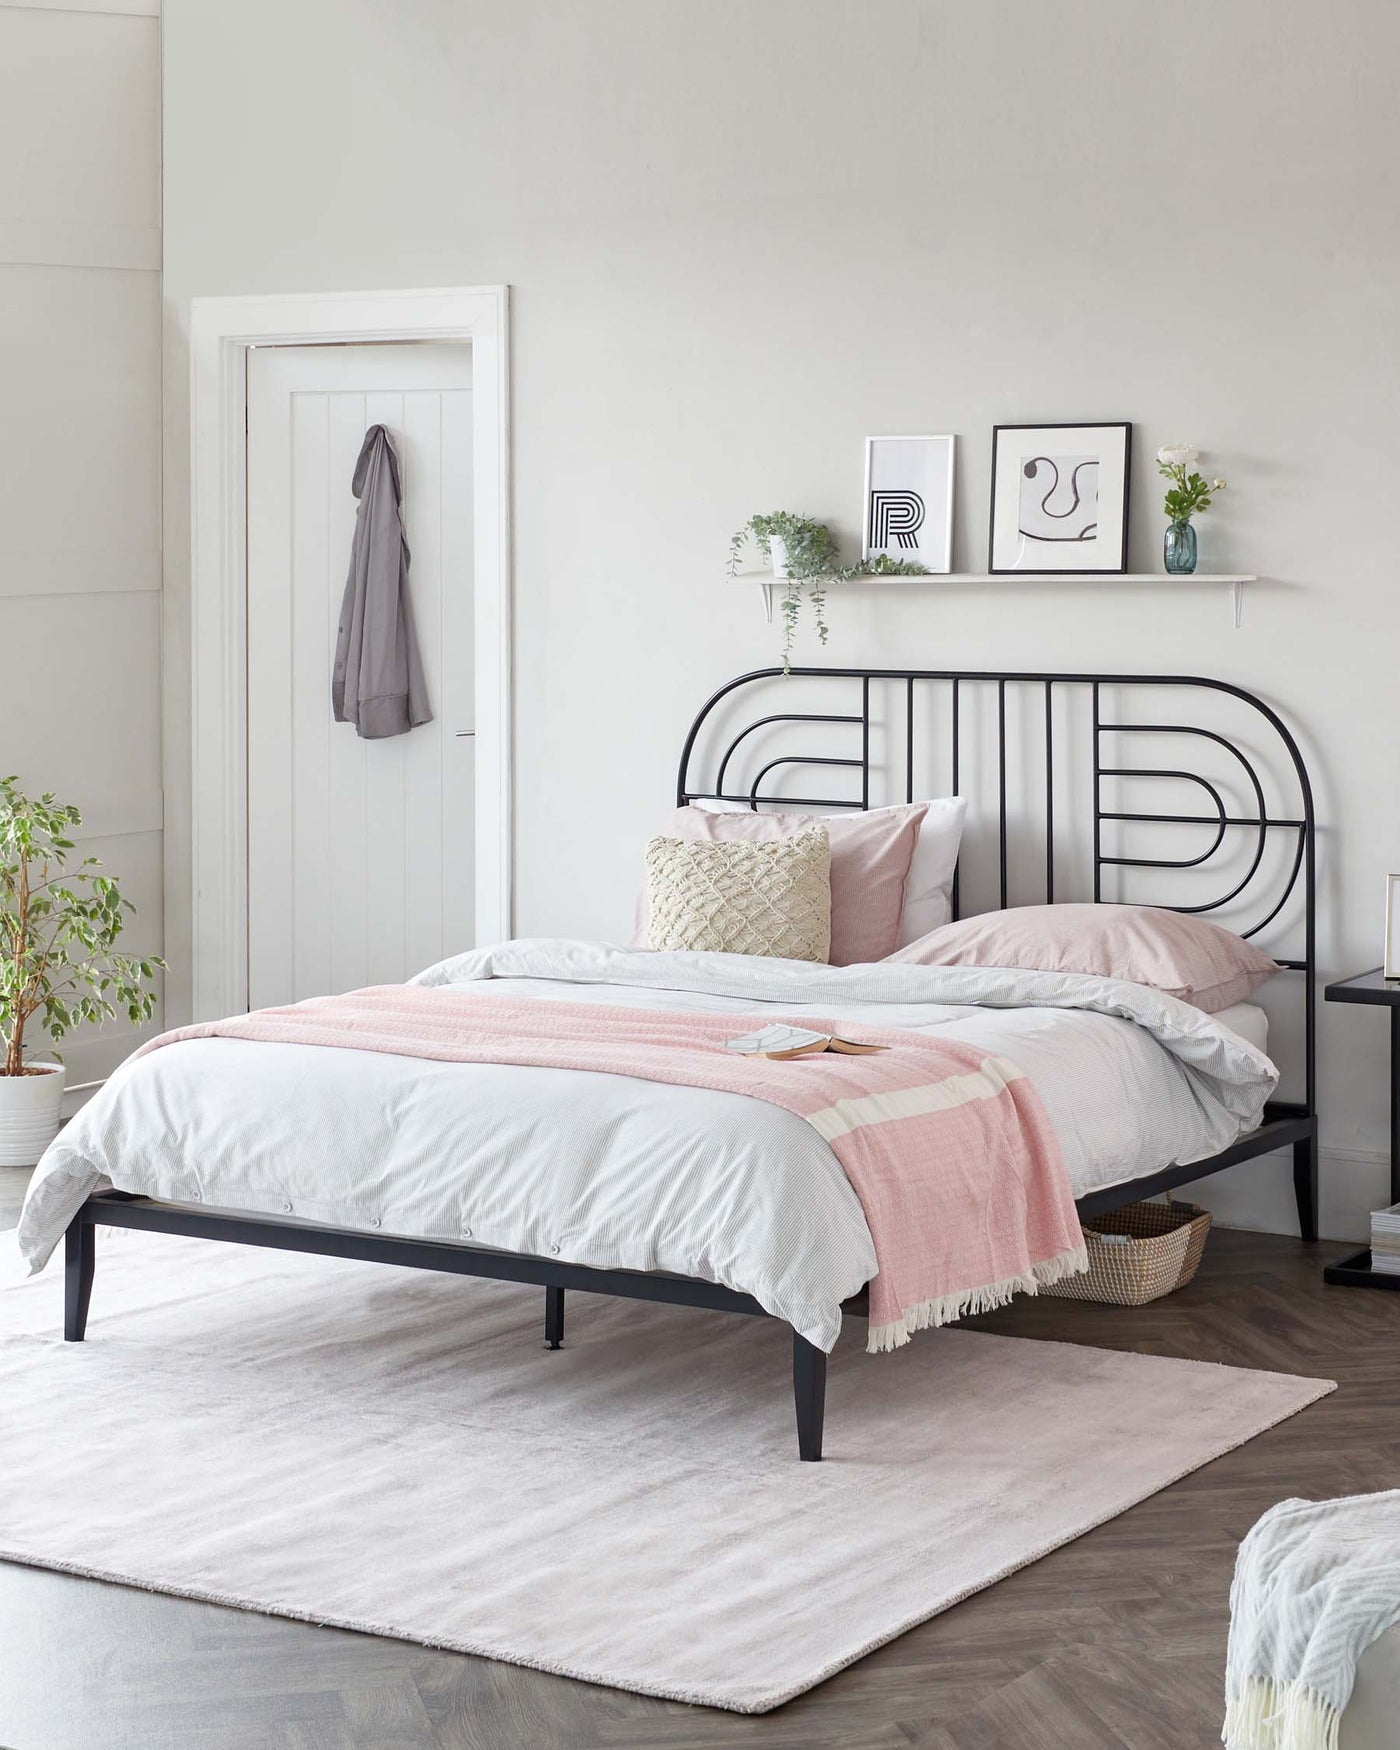 Modern minimalist bedroom with a black metal bed frame featuring a curved headboard, set against a light grey wall. The bed is dressed with white and blush pink bedding, accented by decorative pillows. A light pink area rug rests beneath the bed, and a white floating shelf above the headboard displays framed artwork. A woven basket sits at the bed's foot on the rug, softening the overall contemporary aesthetic.